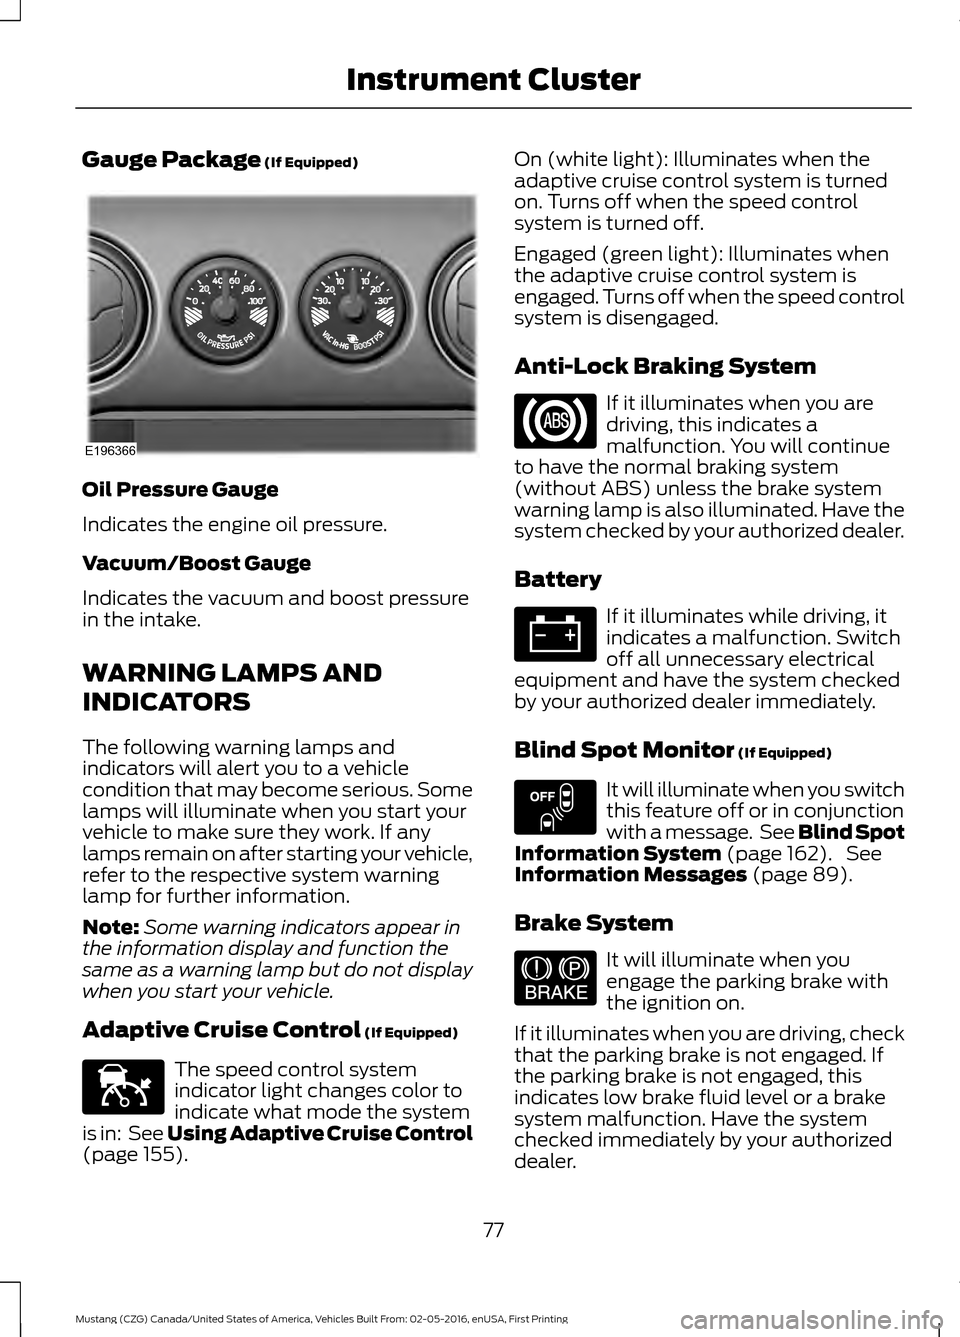 FORD MUSTANG 2017 6.G Manual PDF Gauge Package (If Equipped)
Oil Pressure Gauge
Indicates the engine oil pressure.
Vacuum/Boost Gauge
Indicates the vacuum and boost pressure
in the intake.
WARNING LAMPS AND
INDICATORS
The following w